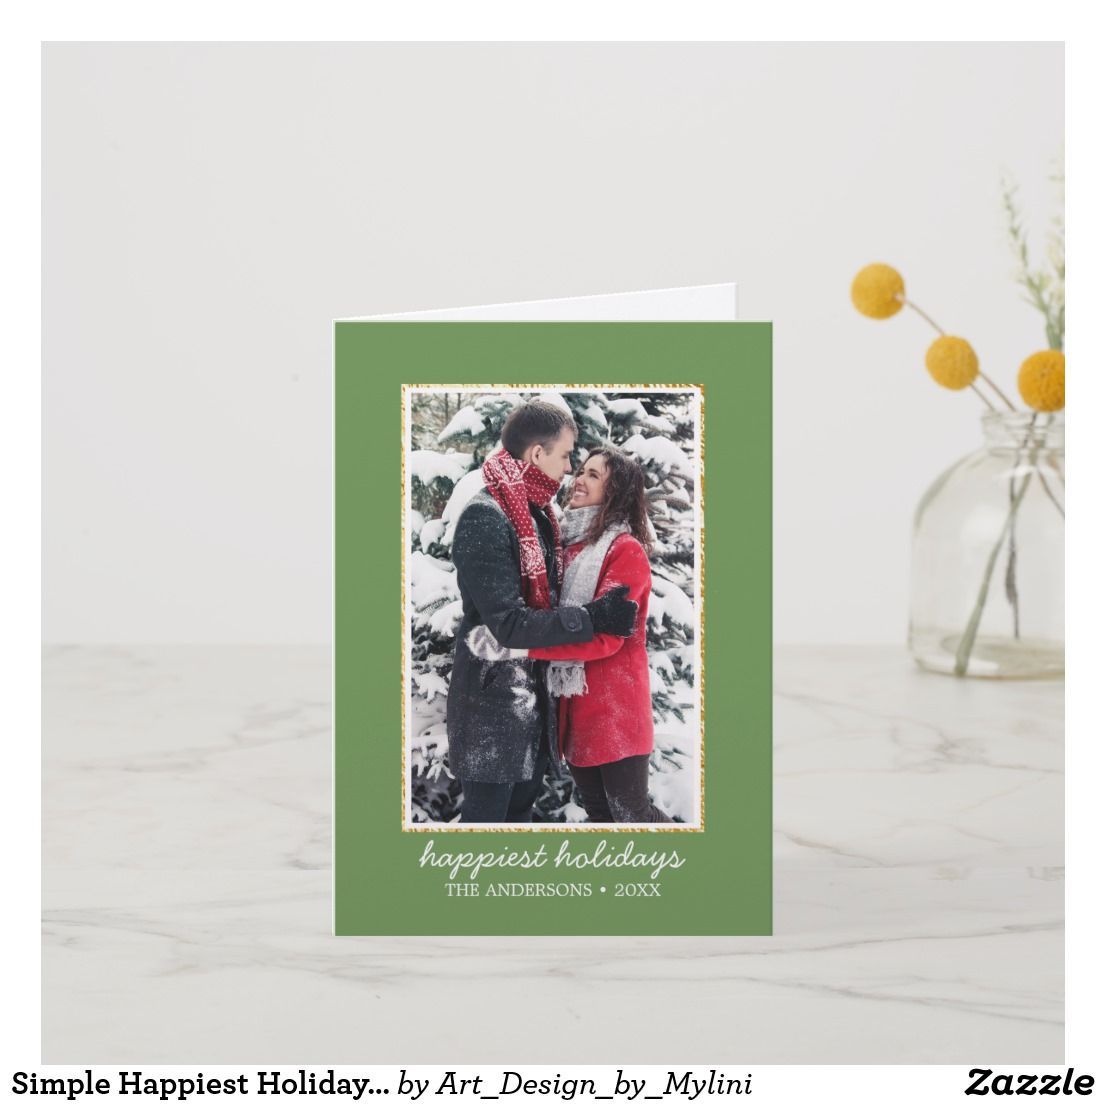 Simple Happiest Holidays Photo Christmas Greetings Holiday Card | Zazzle.com -   22 holiday Photos simple ideas